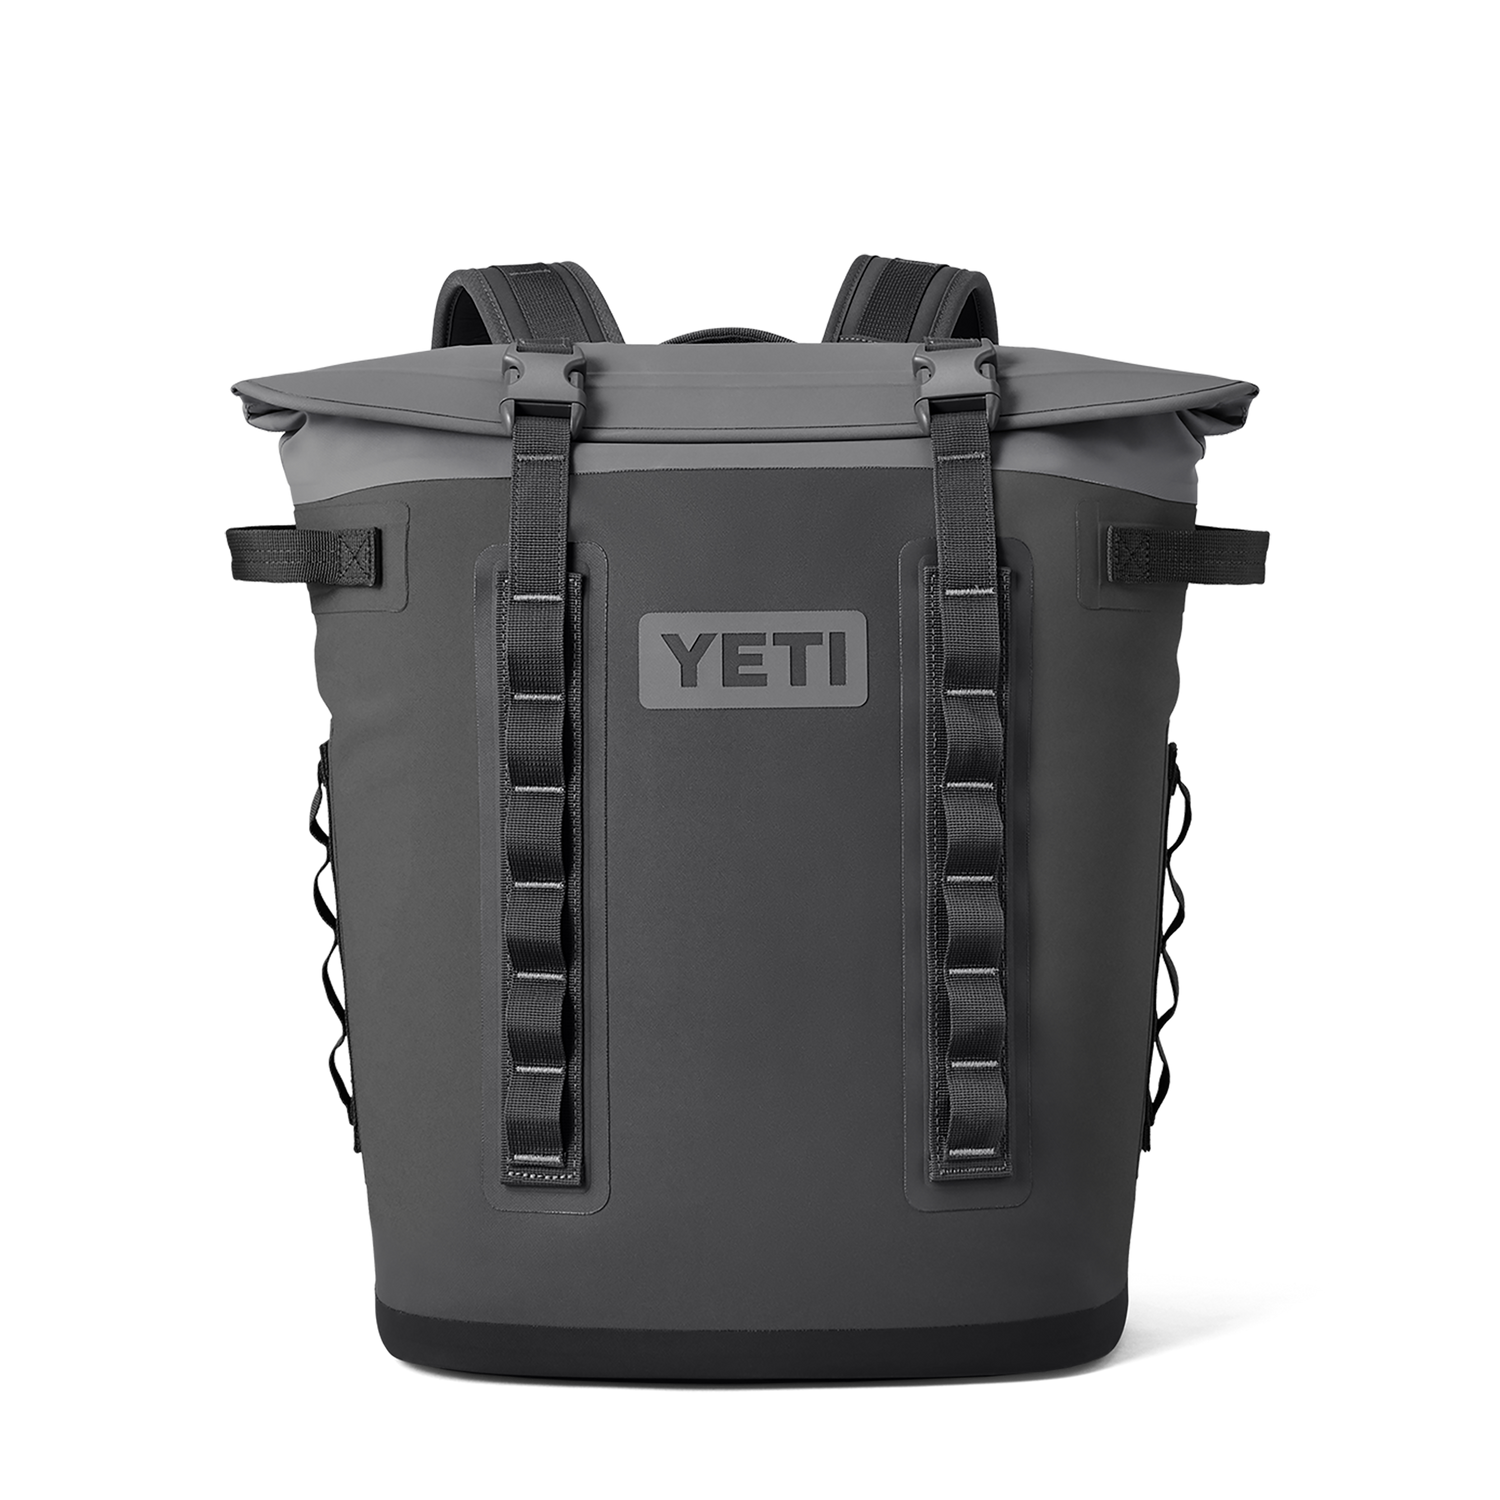 YETI's Hopper M20 Backpack Soft Cooler Is Puncture Proof